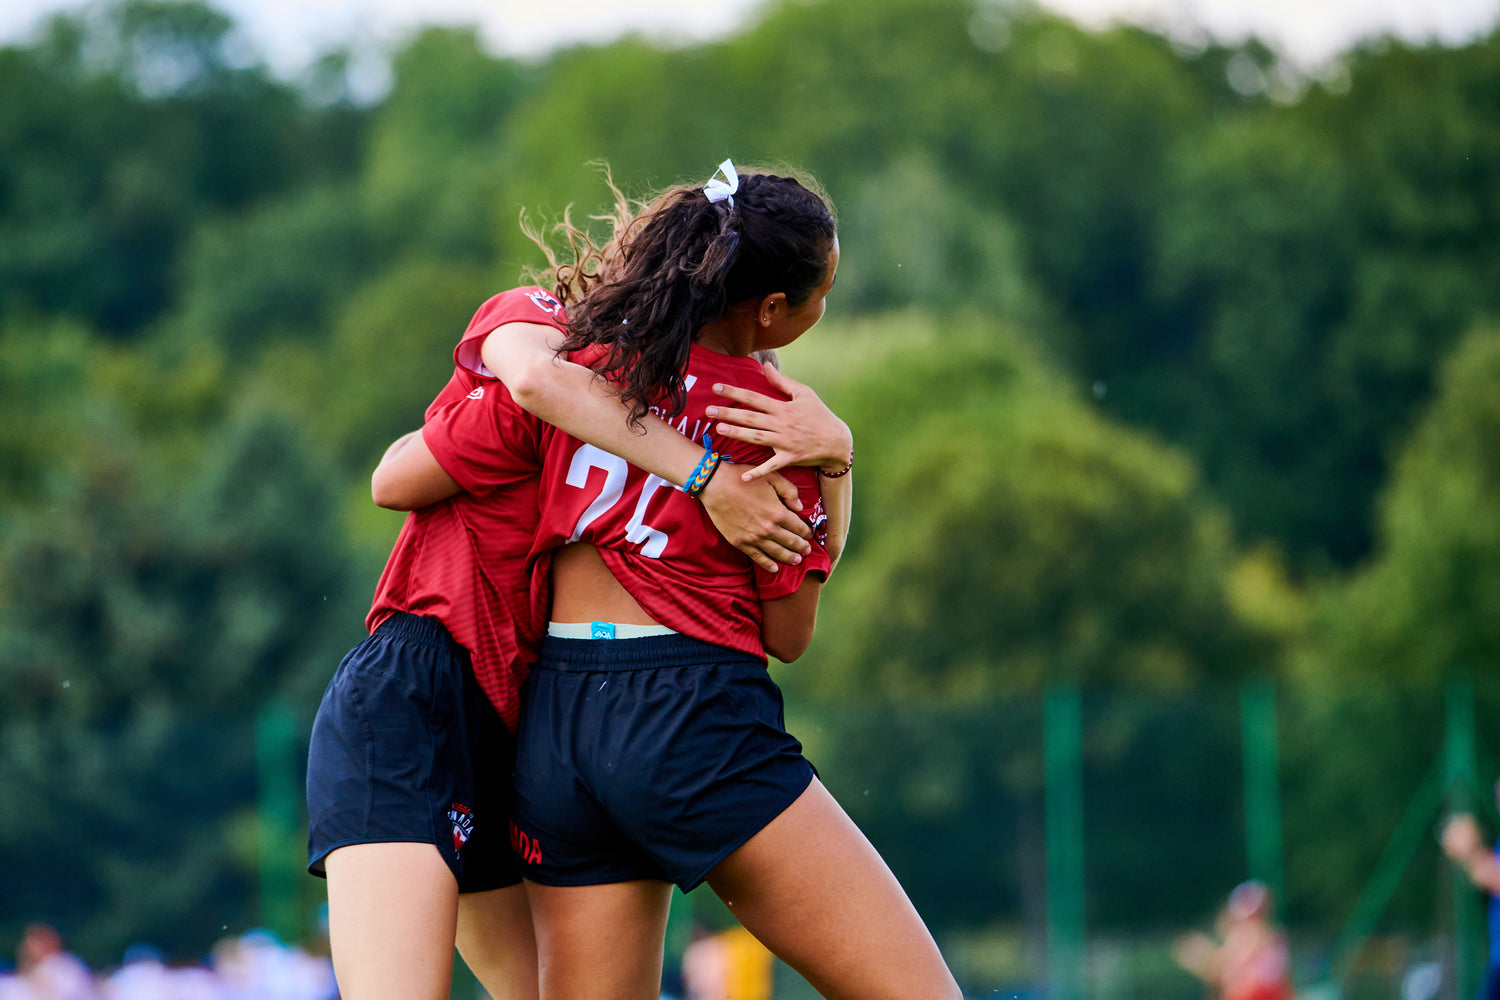 Two JJUC 2022 Ultimate Frisbee athletes hugging each other in their Official Team Canada uniforms, made by VC Ultimate